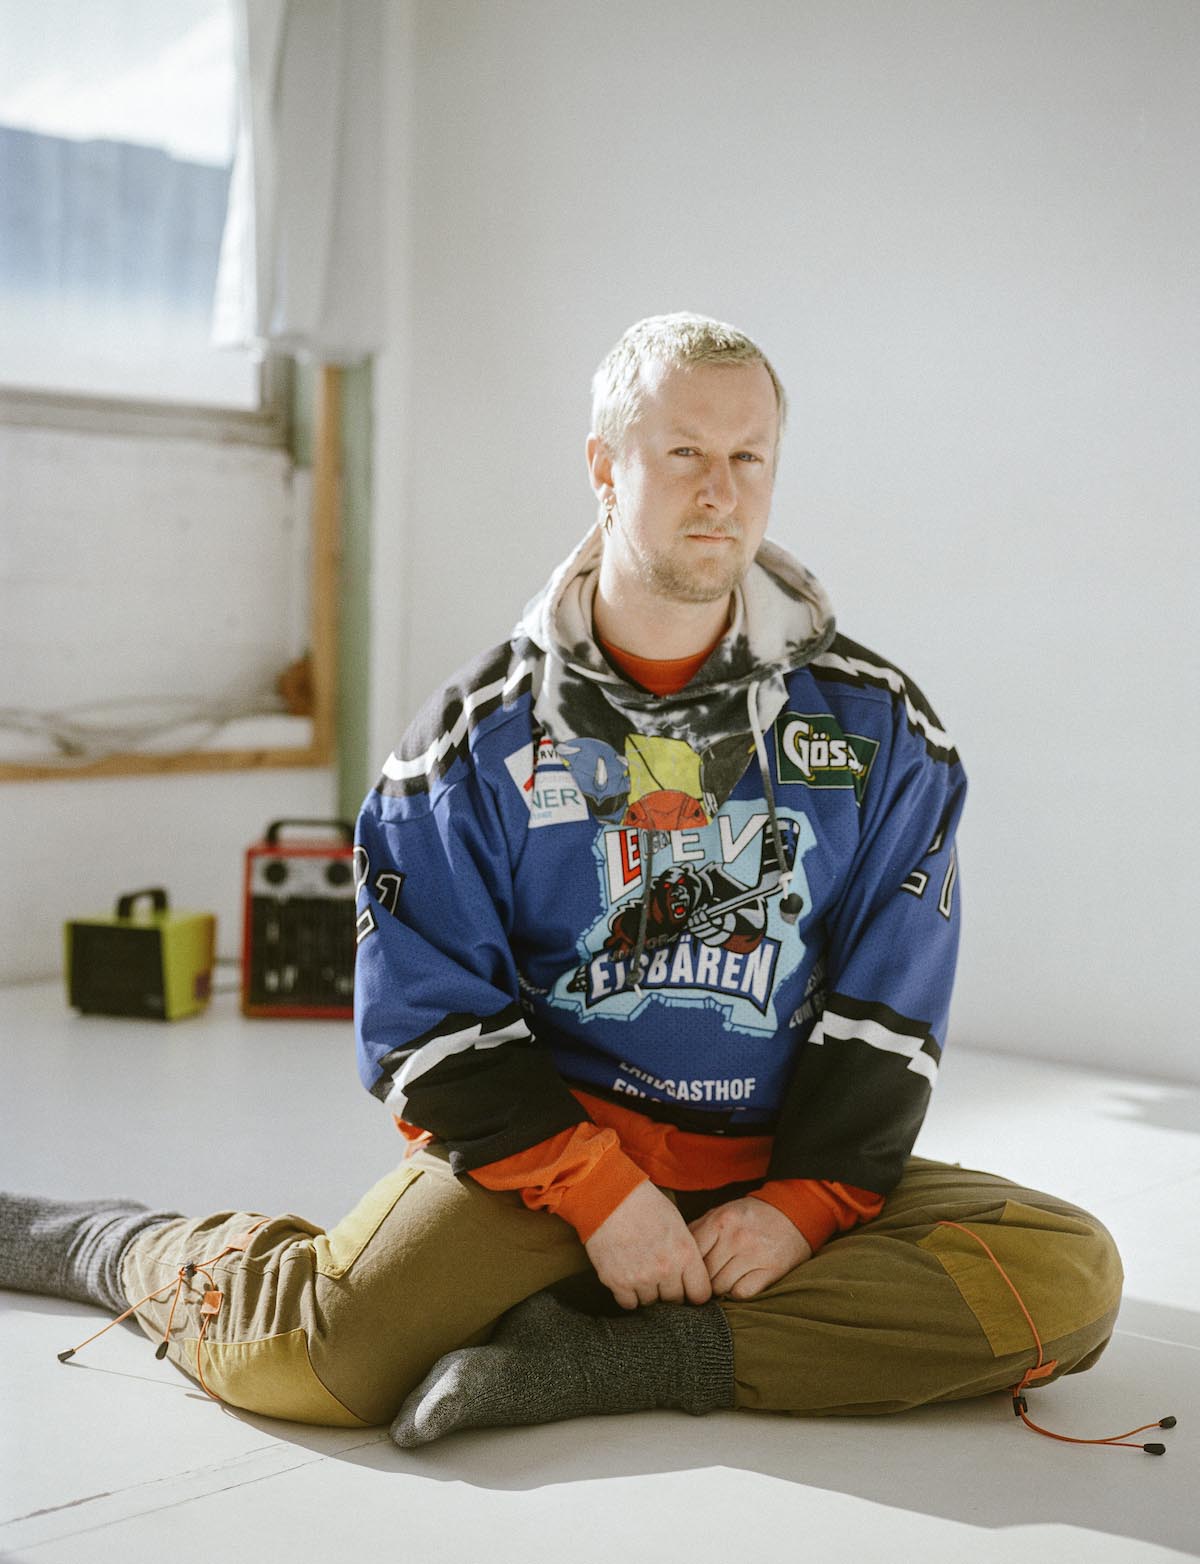 Long shot of Colin Self. Self is sitting upright on the floor in a half cross-legged position, but the right leg is positioned outwards and slightly bent. Self's hands rest on the calf of the left leg, which is bent inwards. Colin Self is wearing a black and white batik hoodie, over it a blue, black and white jersey of an ice hockey team with the name "Polar Bears", brown long trousers with orange thin bands around the knees and grey, thick woollen socks. Self has short blond hair, a blond three-day beard, a long gold earring in his right earlobe. Colin Self is sitting in a room with white walls, windows to the left.